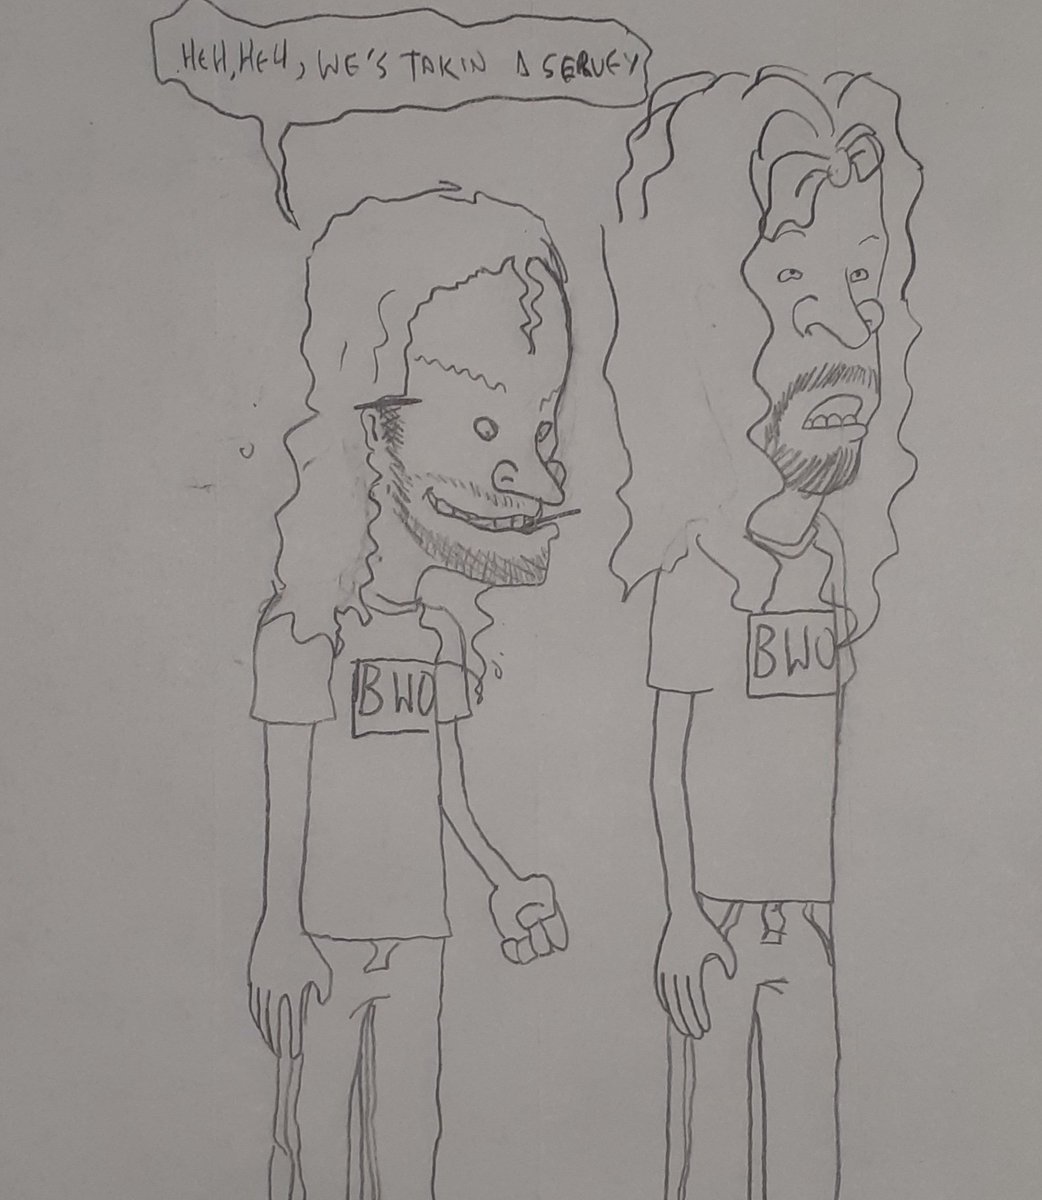 Another Beavis and Butthead wrestling bit. Oh 1996. Never change. 
And more RP character design work from 1998/99
A Vince McMahon I drew in 2002.
And Jr. High me thought he was Gary Larson doing comics for the school paper... 